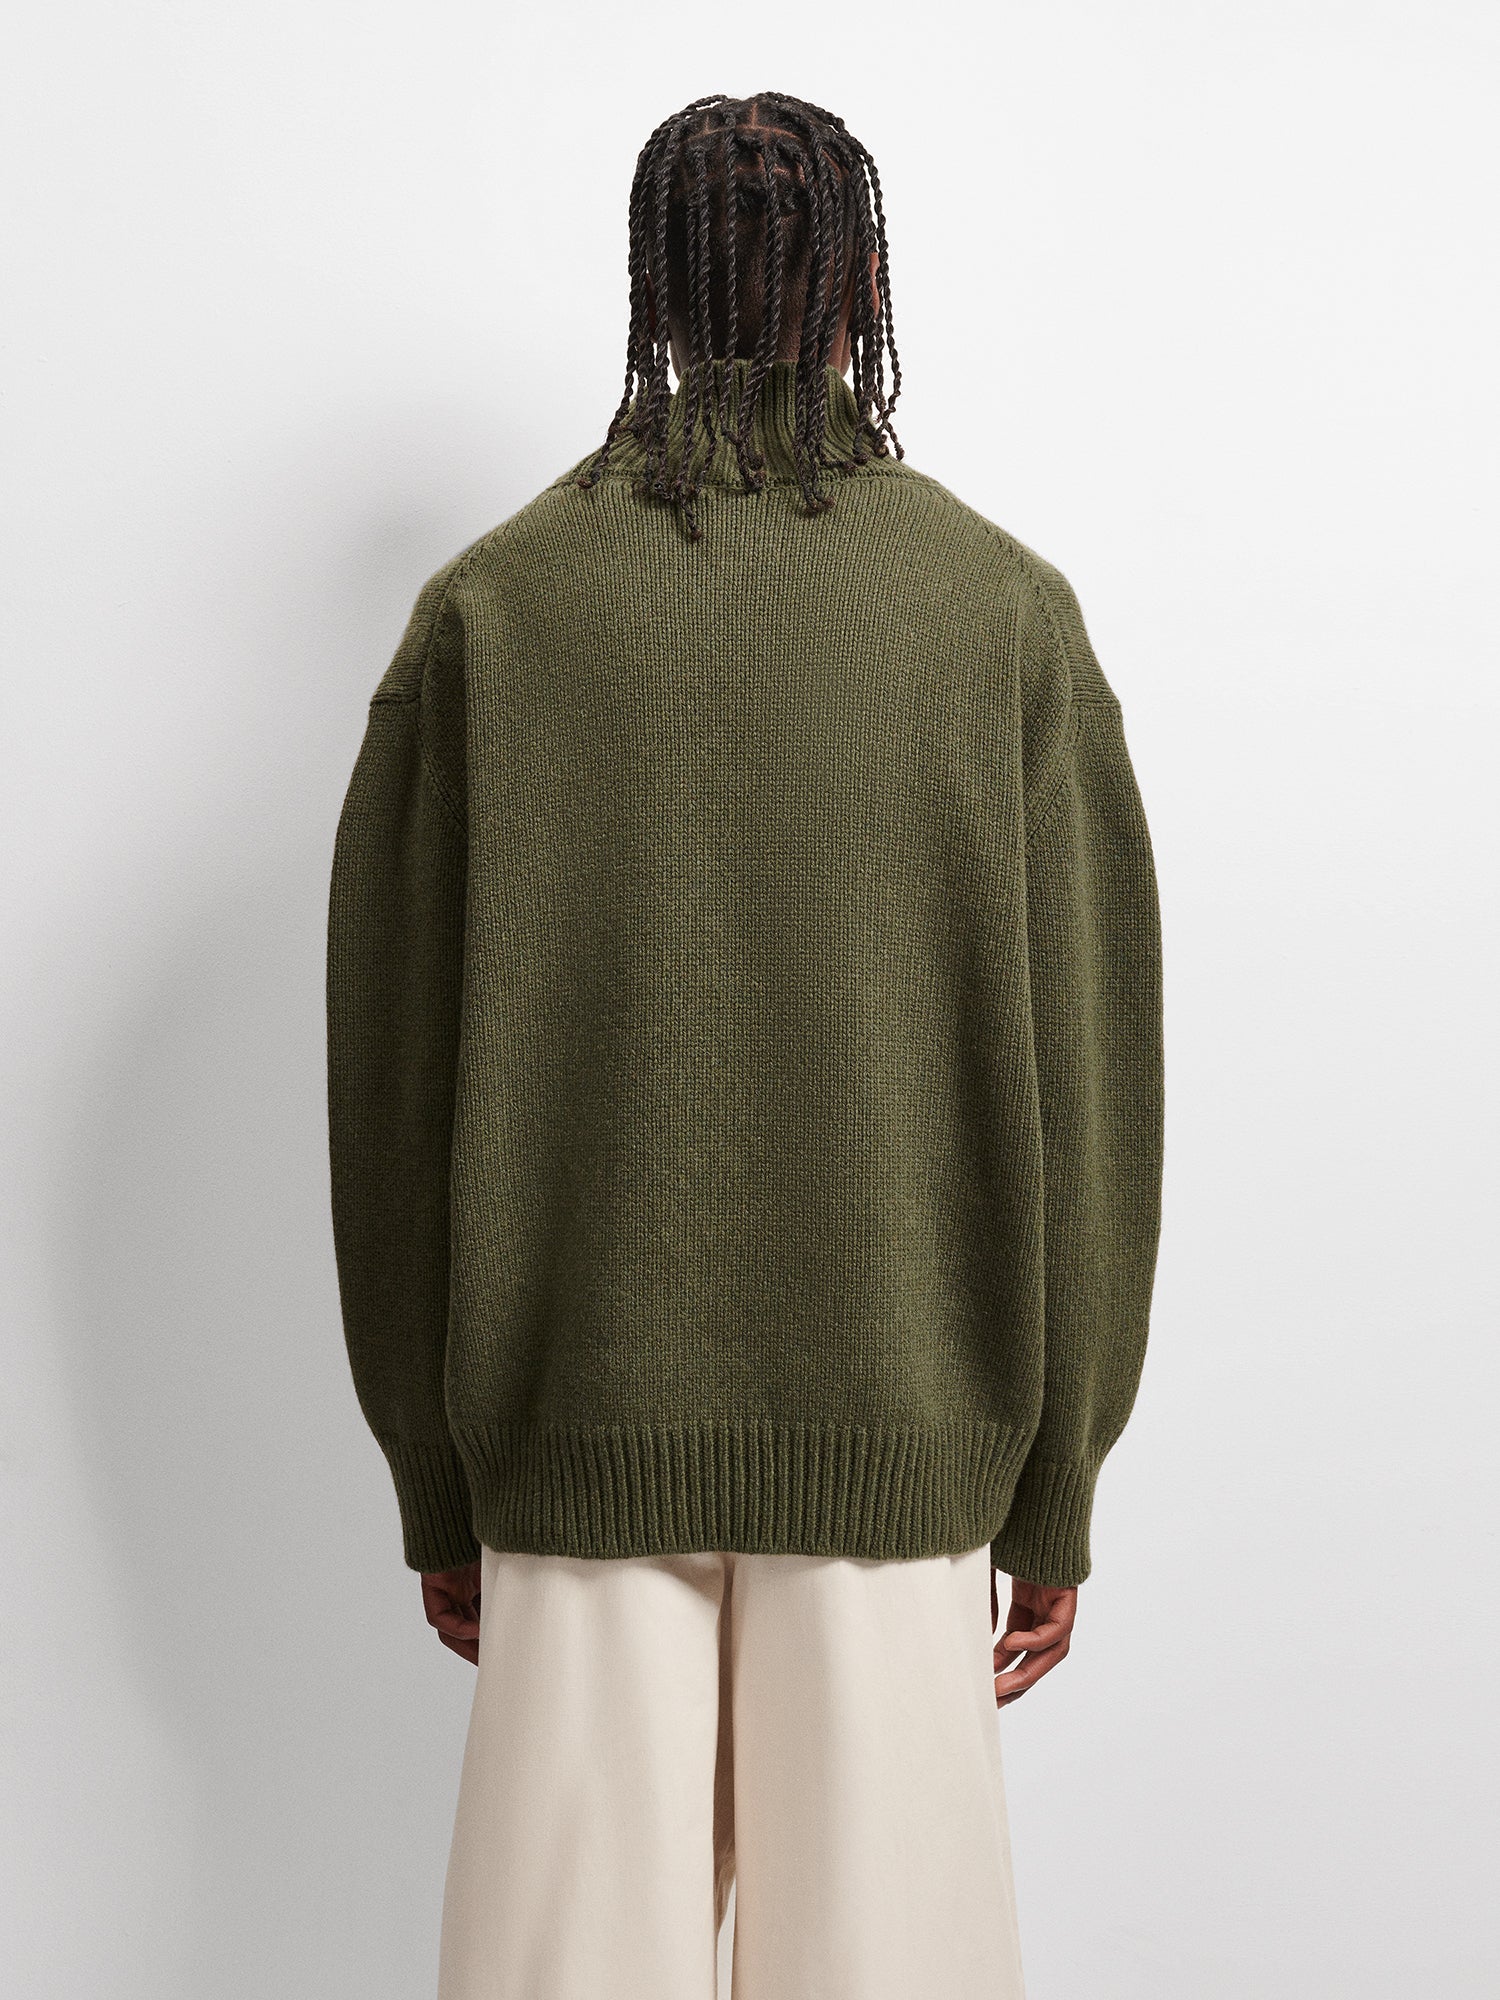 Men's Recycled Cashmere Turtleneck Sweater - Rosemary Green - Pangaia